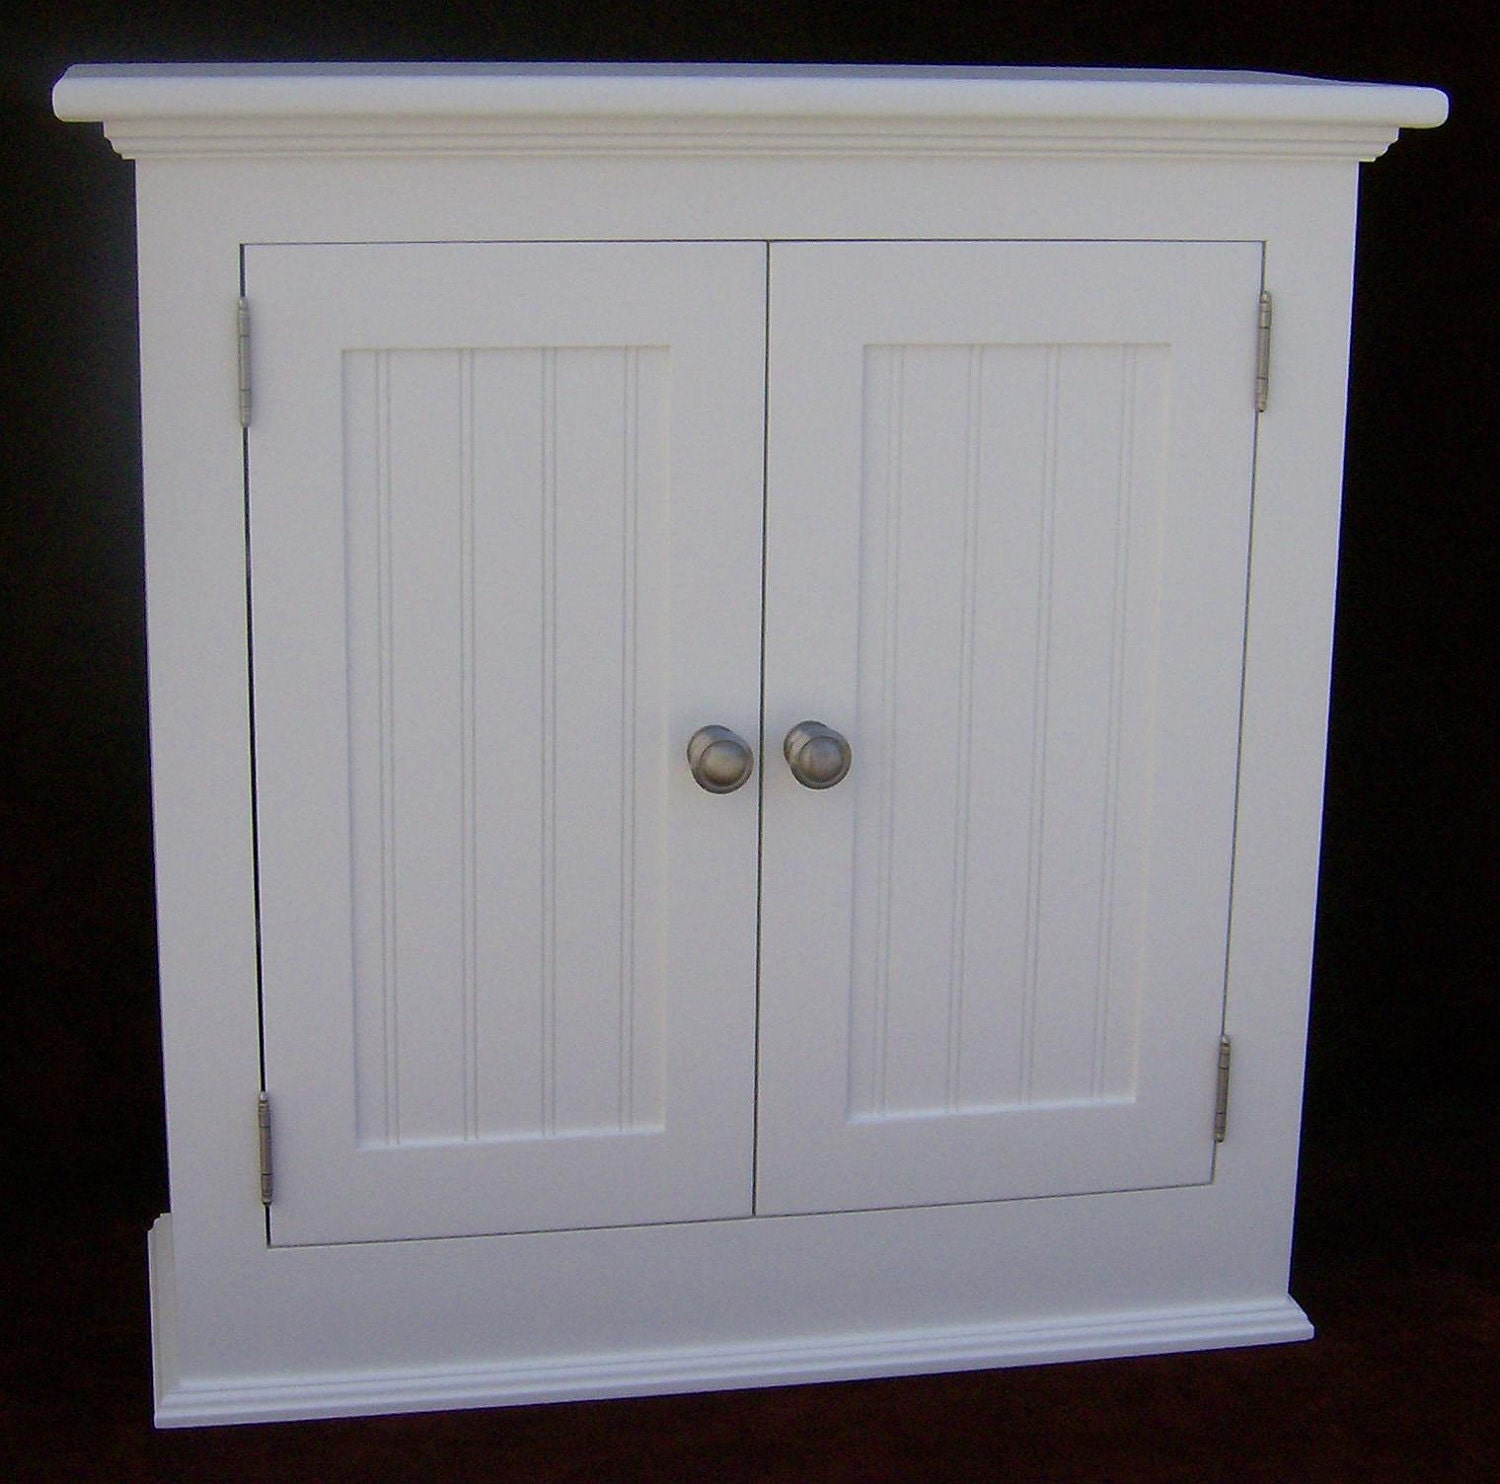 Arts and Crafts Bathroom Storage Cabinet by OnlyOak on Etsy